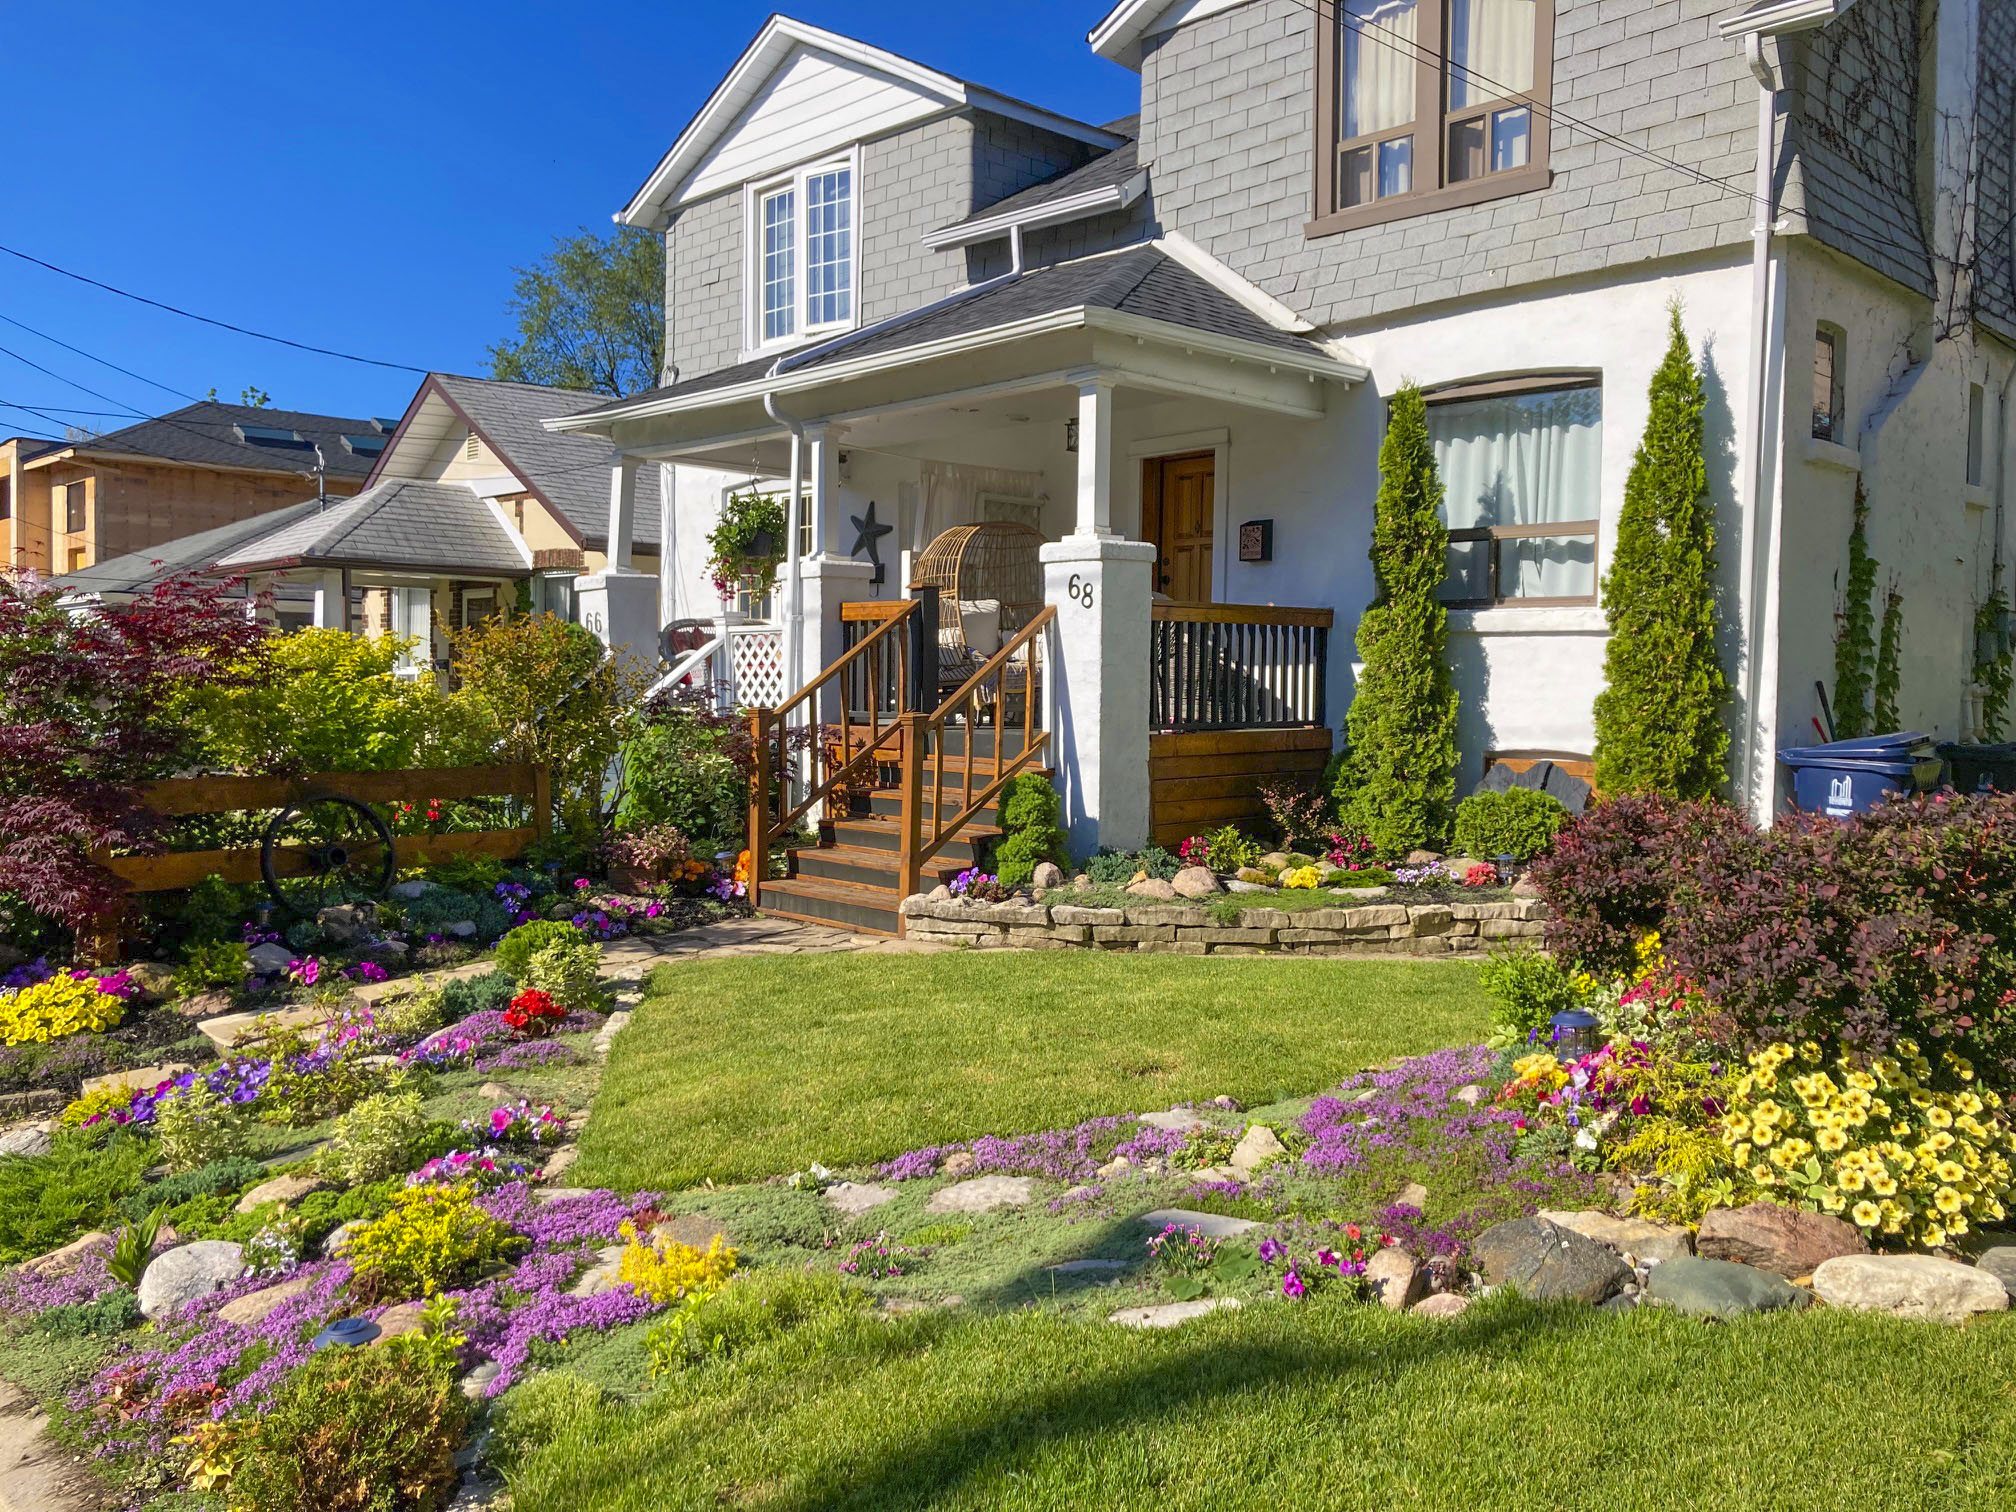 A front lawn garden in front of a house that has purple, yellow, green and red flowers.